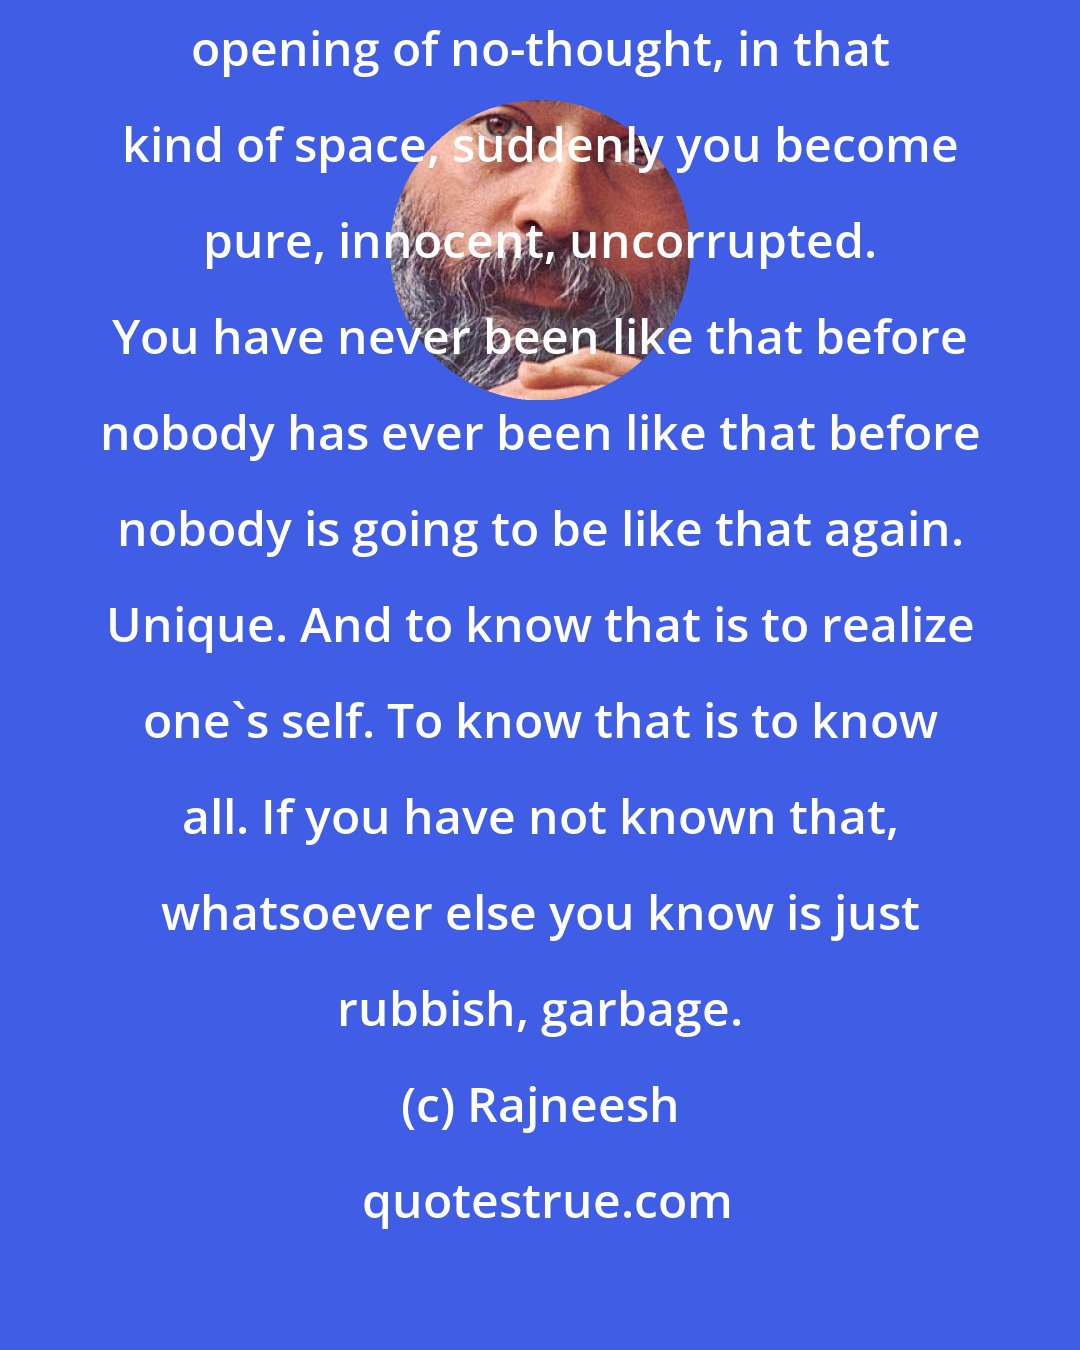 Rajneesh: Meditation is to attain to a no-mindness, to a state of no-thought. In that opening of no-thought, in that kind of space, suddenly you become pure, innocent, uncorrupted. You have never been like that before nobody has ever been like that before nobody is going to be like that again. Unique. And to know that is to realize one's self. To know that is to know all. If you have not known that, whatsoever else you know is just rubbish, garbage.